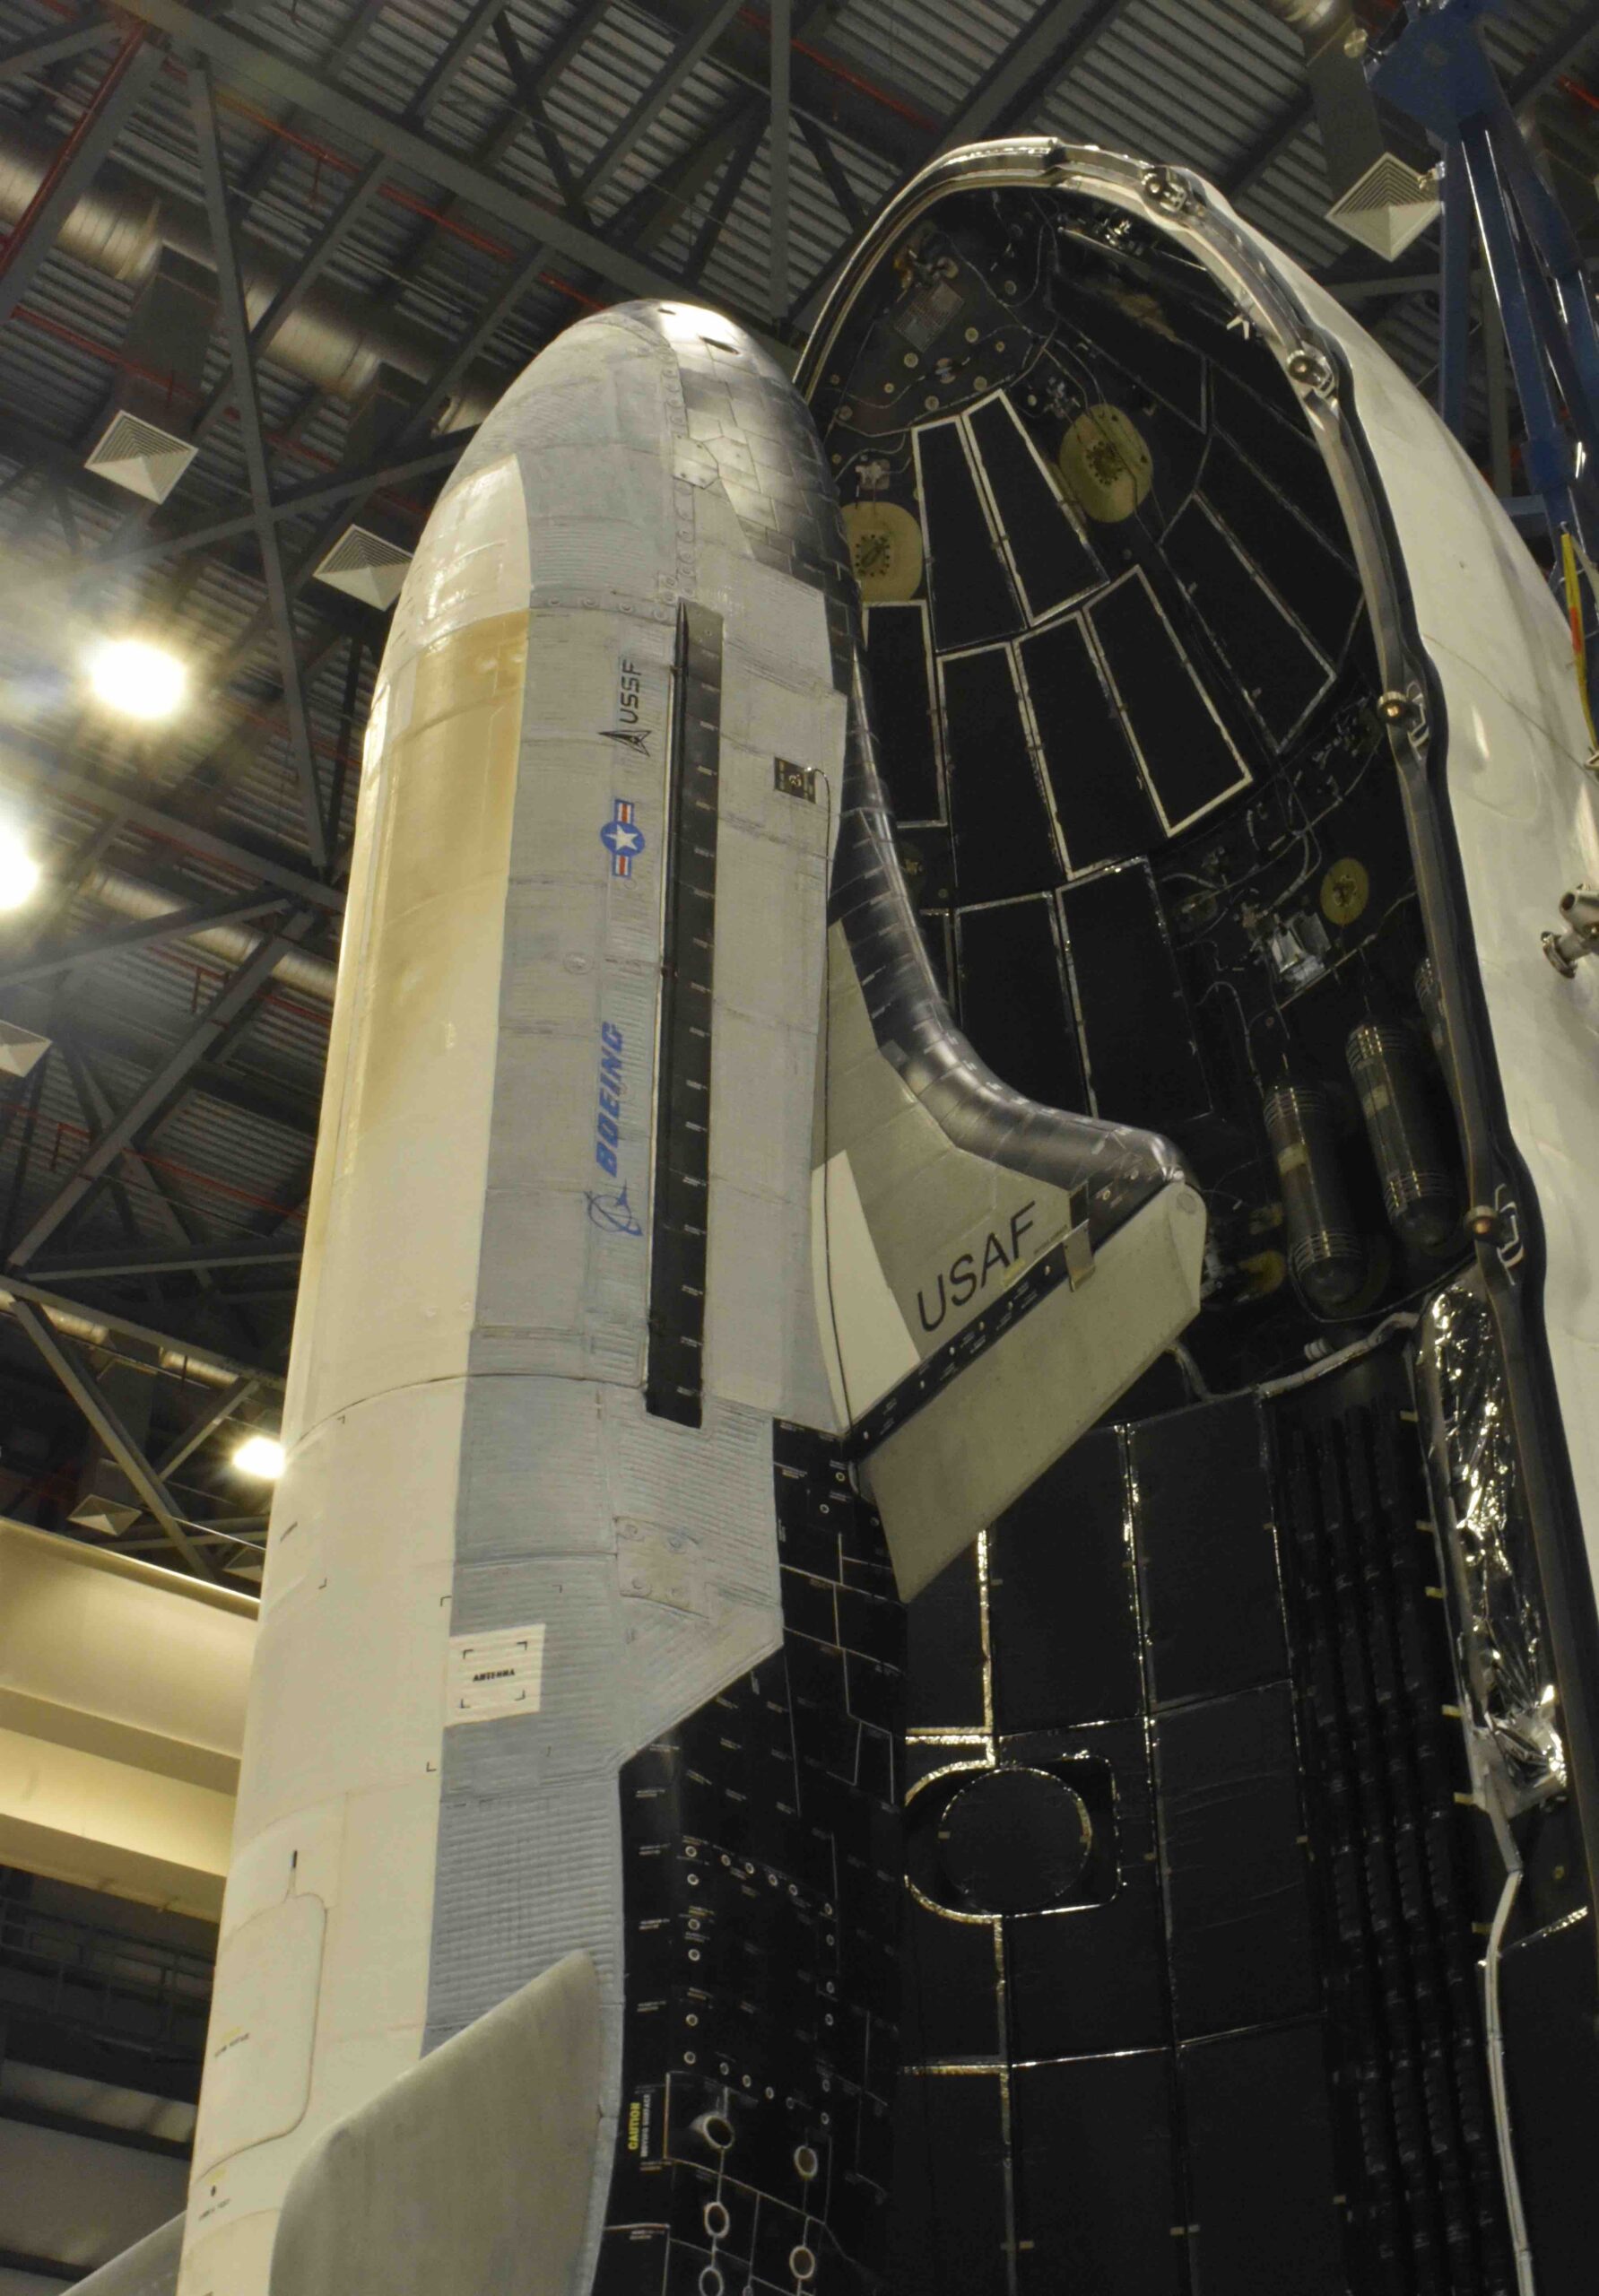 USSF-52 Mission: X-37B Prepared for SpaceX Falcon Heavy Launch